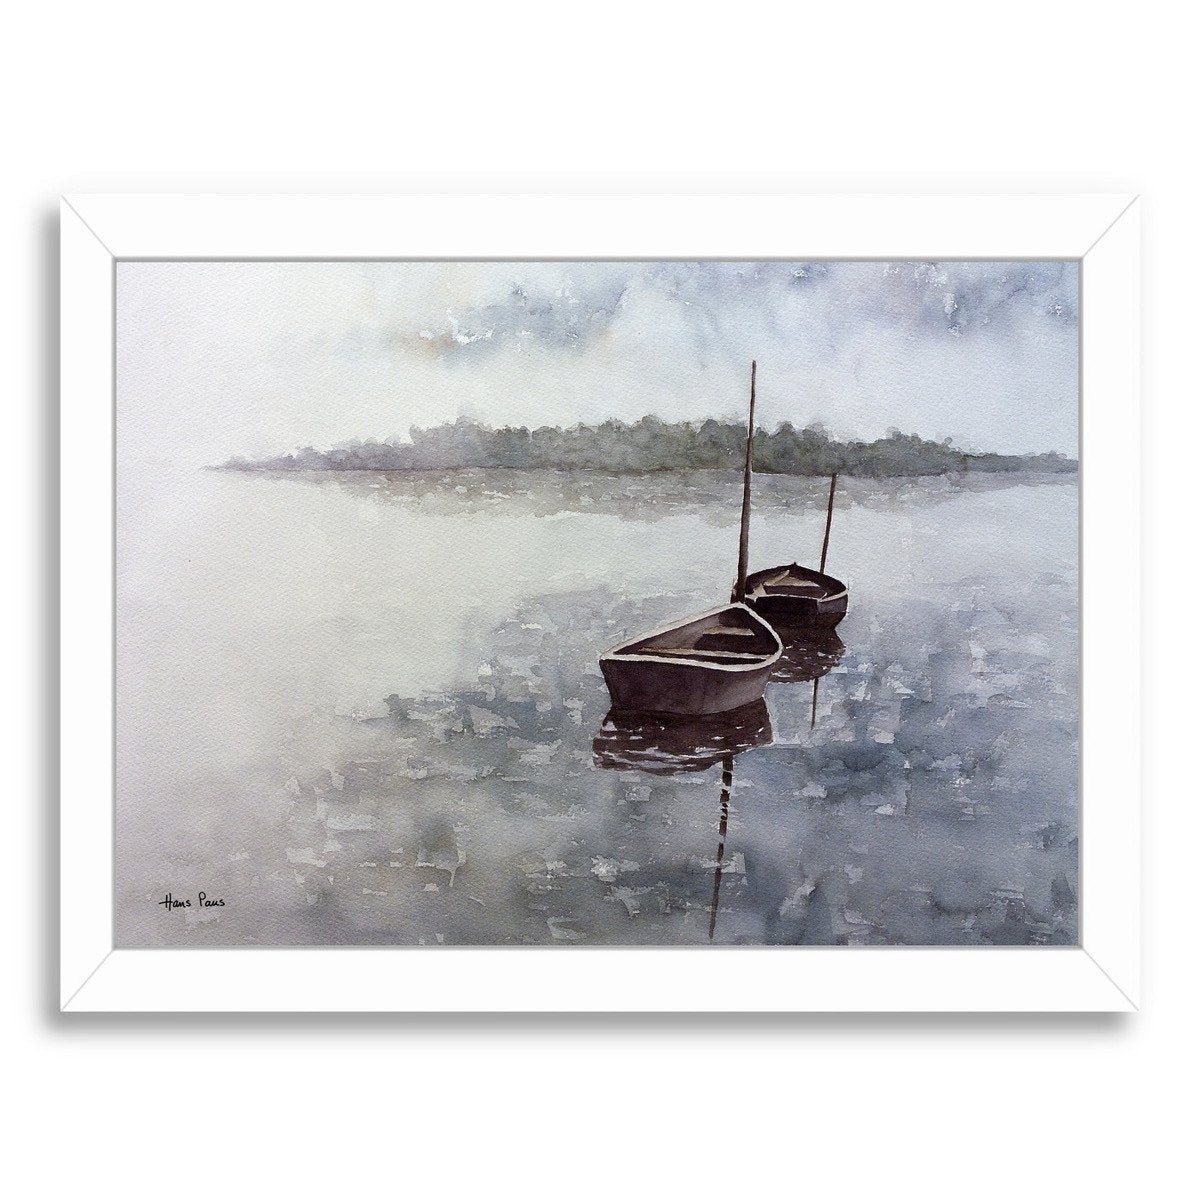 Boats 1 By Hans Paus - Framed Print - Americanflat